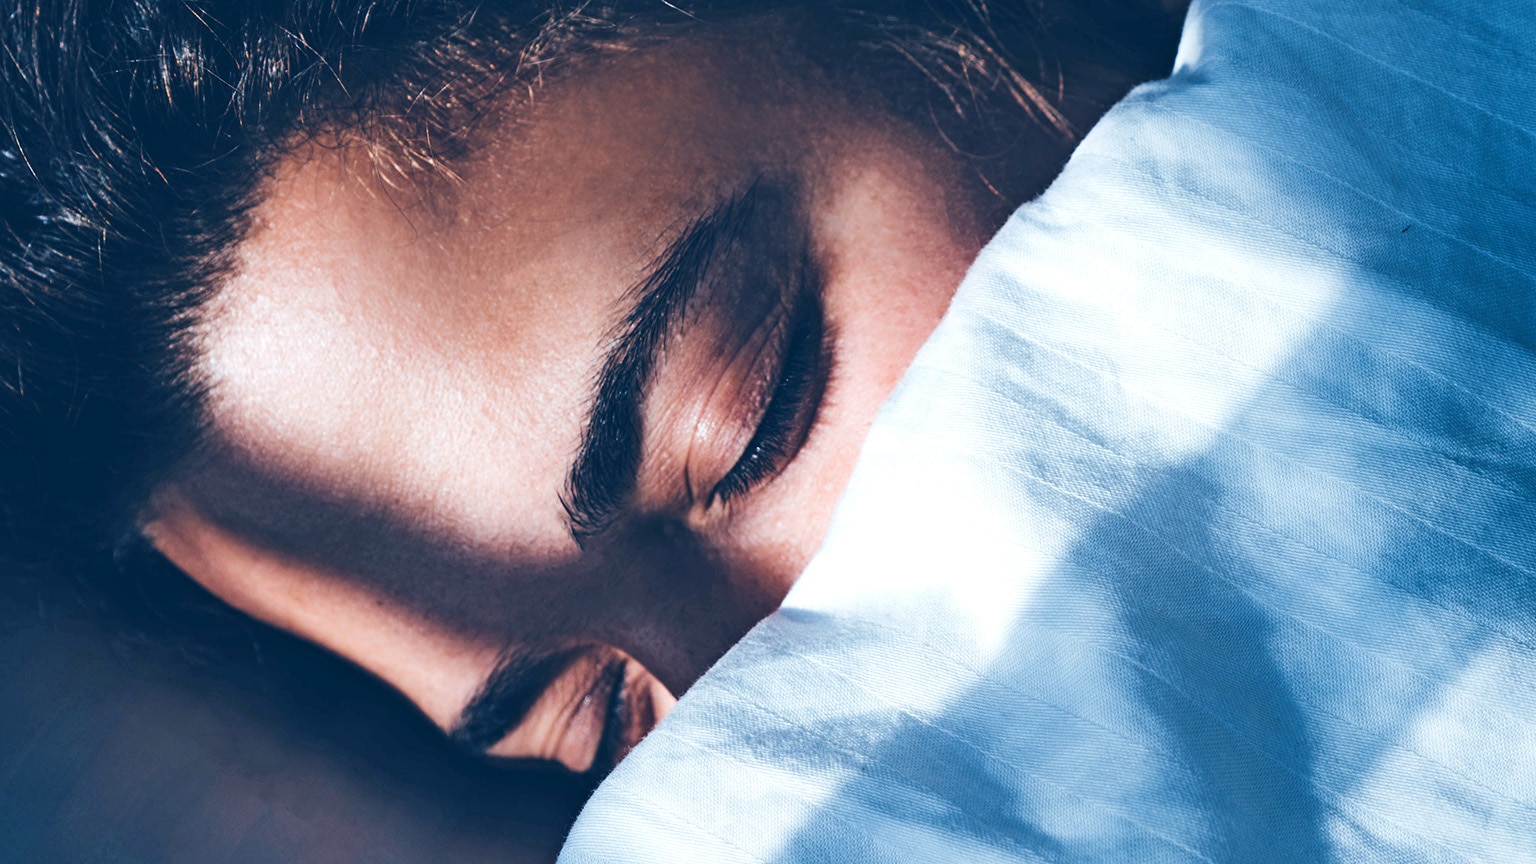 Close-up of a person sleeping with the covers over the bottom half of their face.